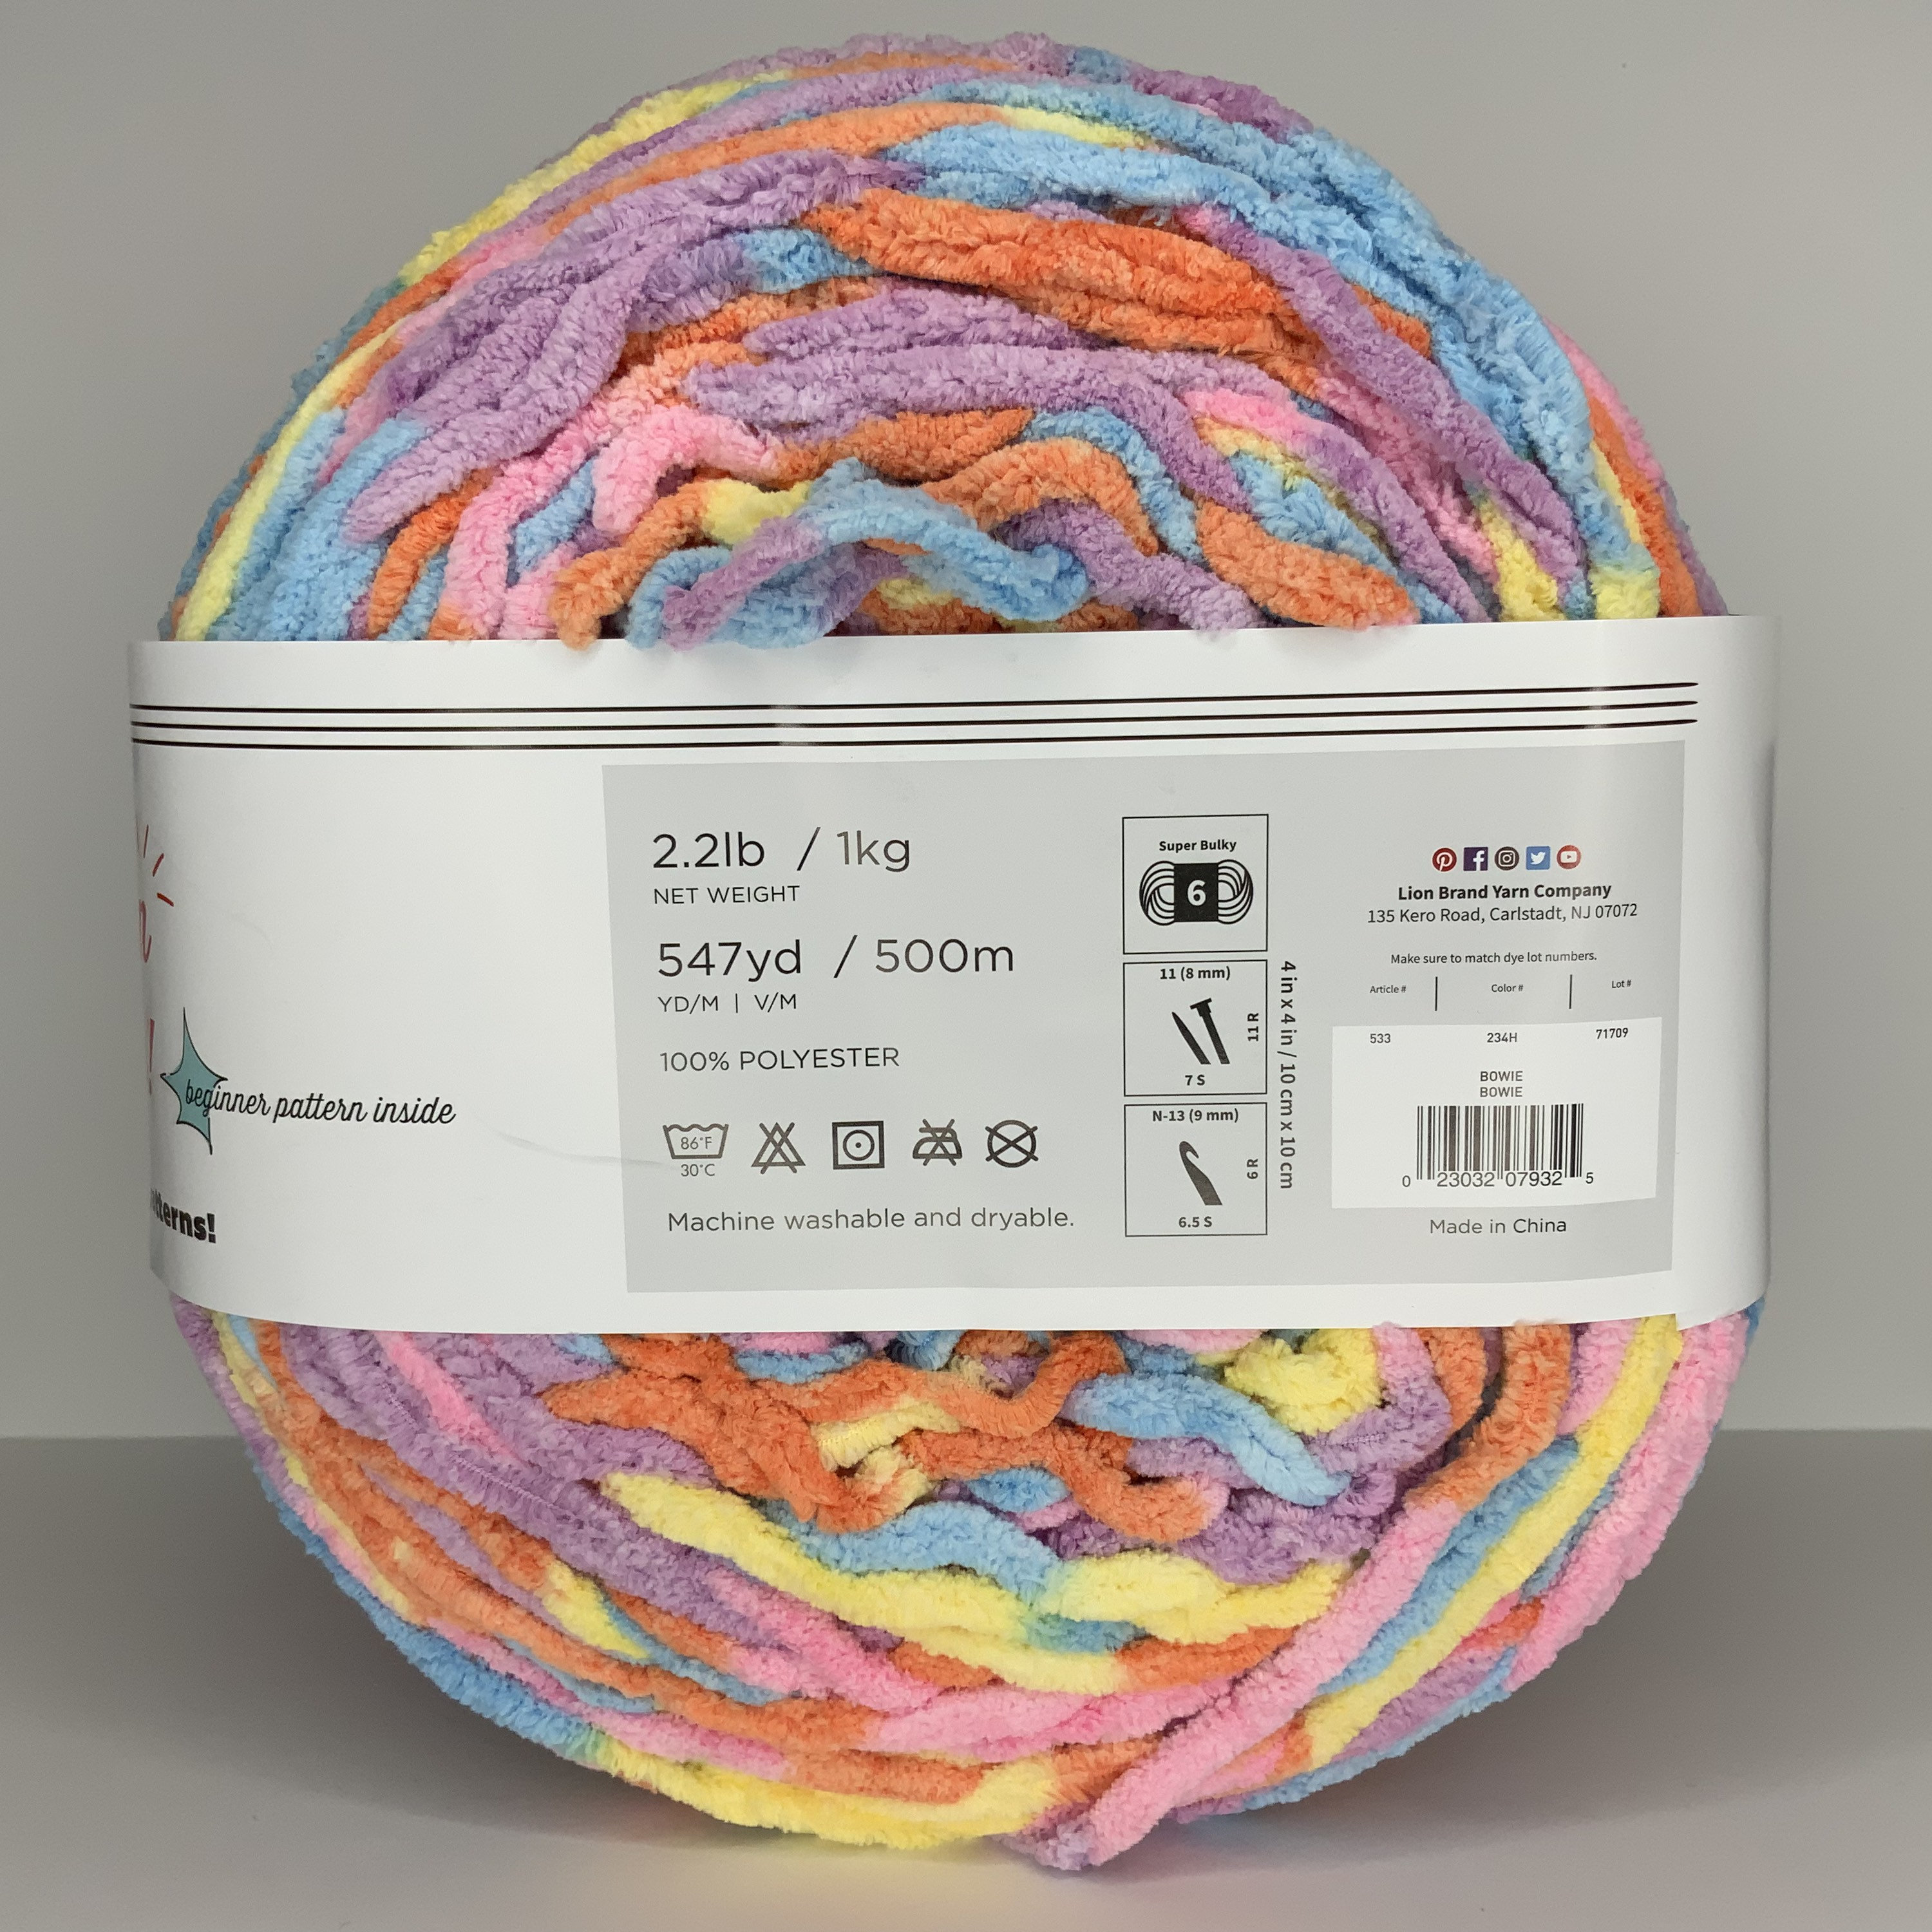 Lion Brand Cover Story Yarn in Canada, Free Shipping at